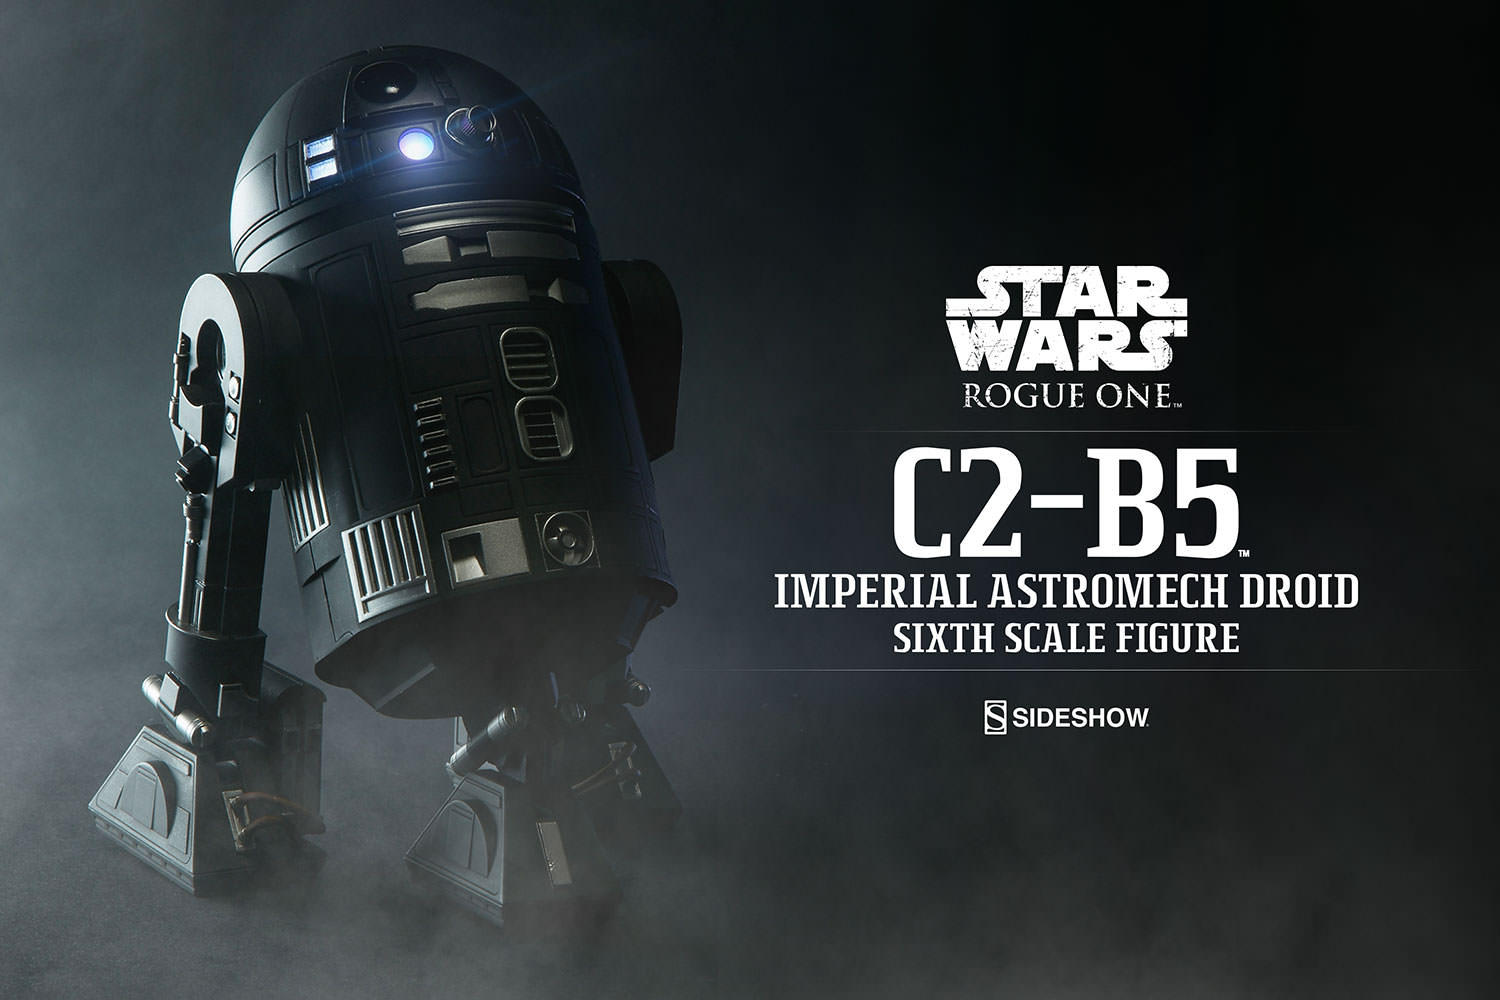 star-wars-rogue-one-c2-b5-imperial-astromech-droid-sixth-scale-100417-01.jpg